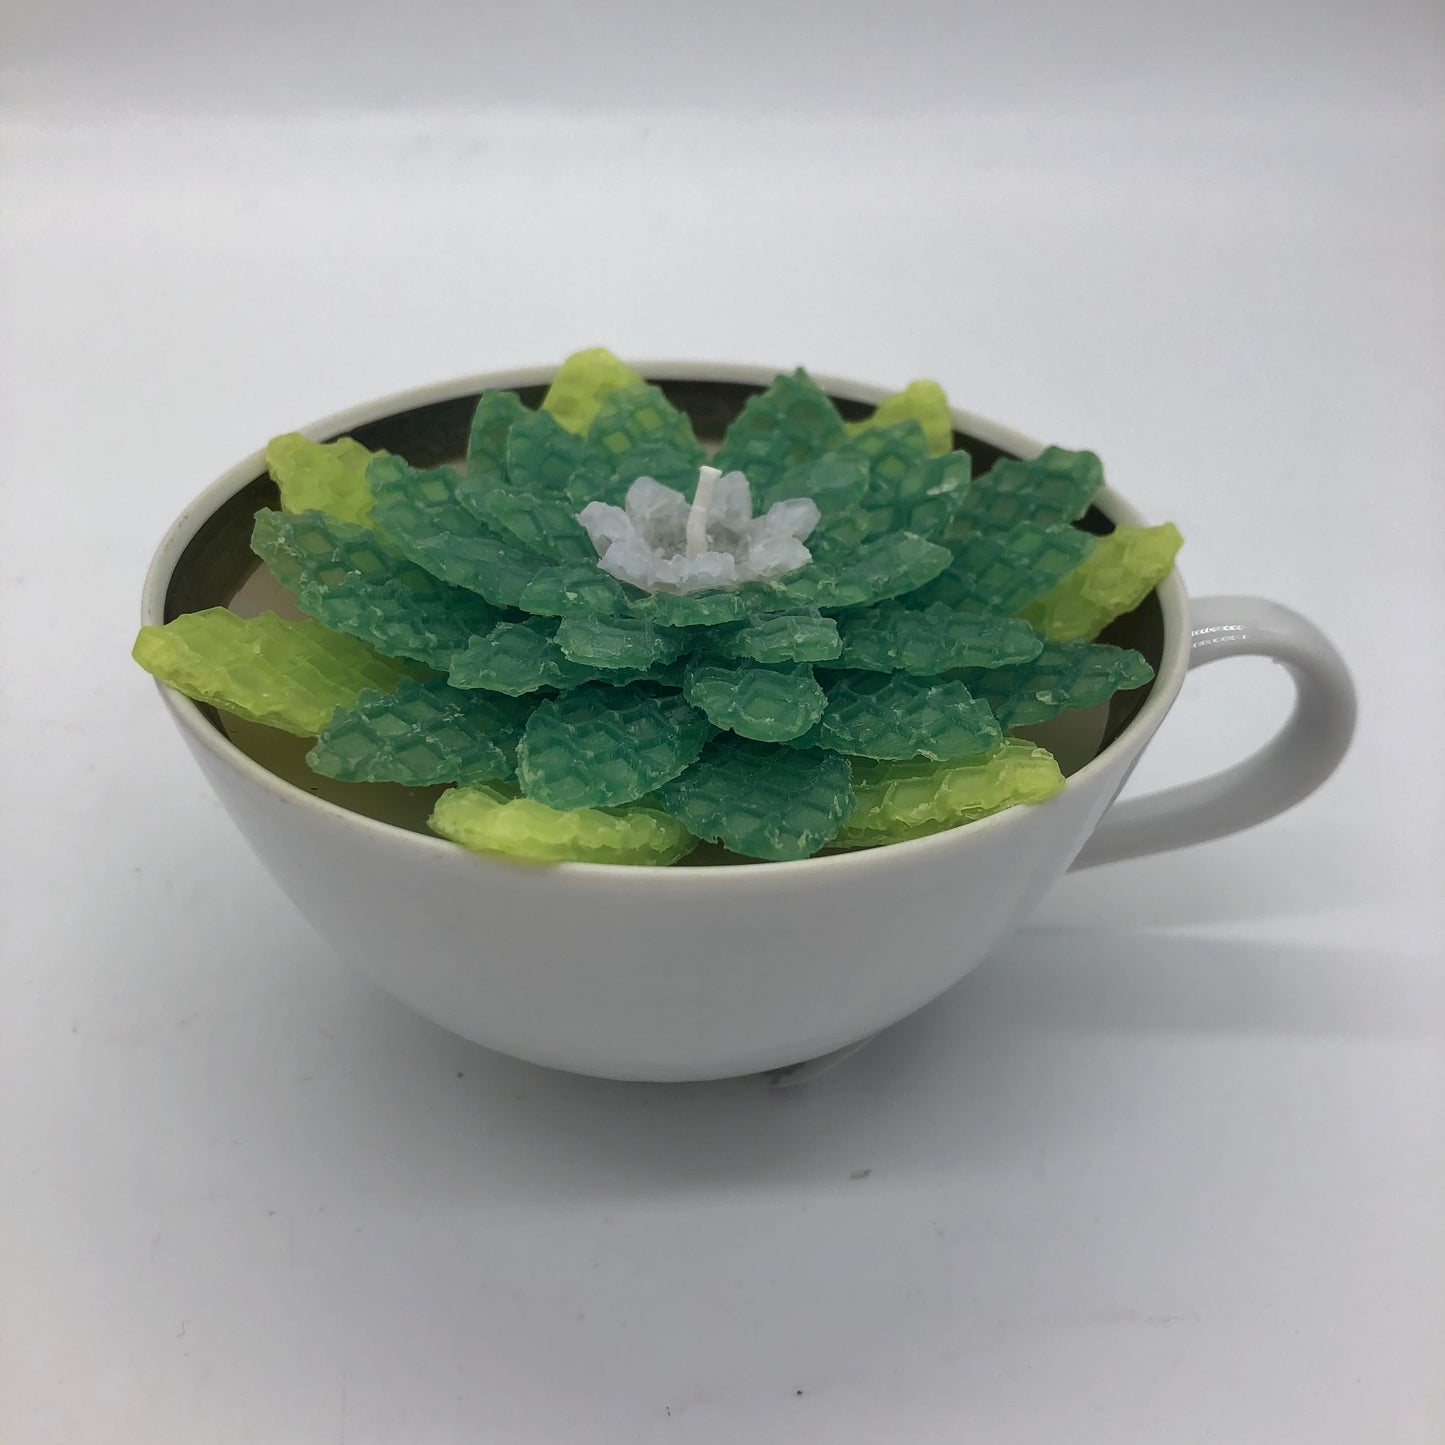 White tea cup filled with candle and shades of green beeswax succulent with lavender center on top